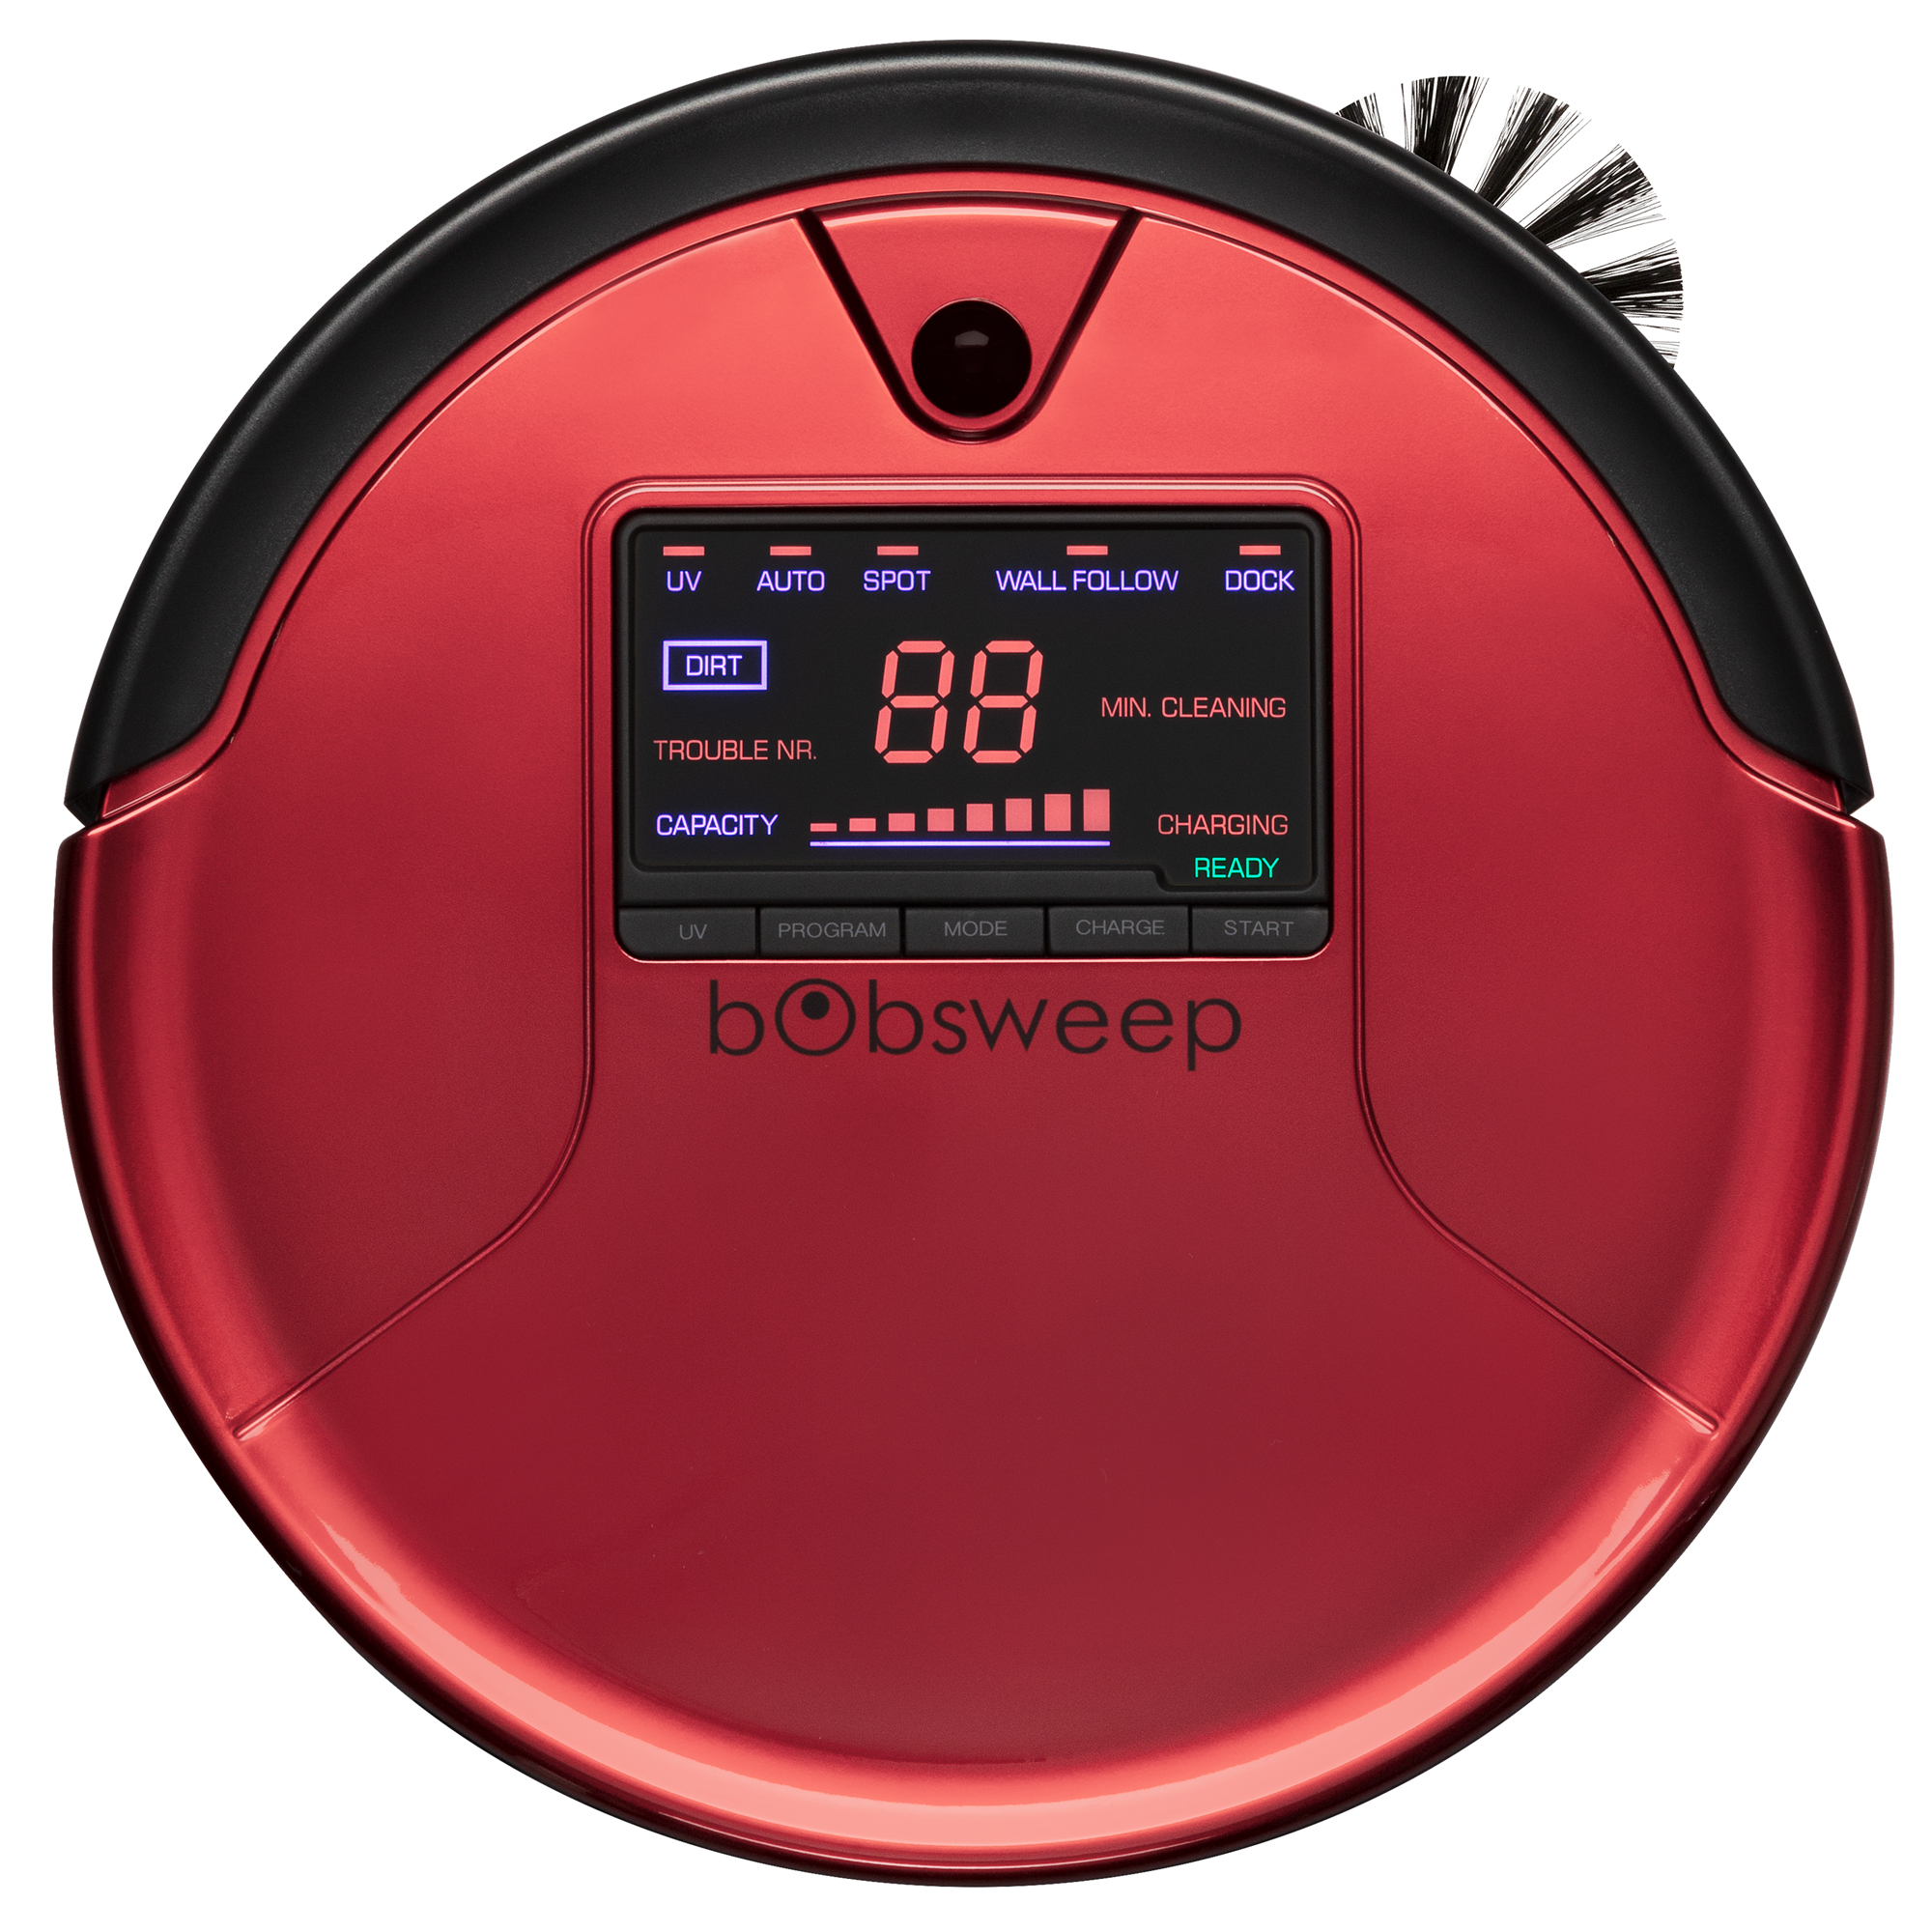 Bobsweep Pet Hair Robotic Vacuum Cleaner and Mop, Rouge - image 1 of 9